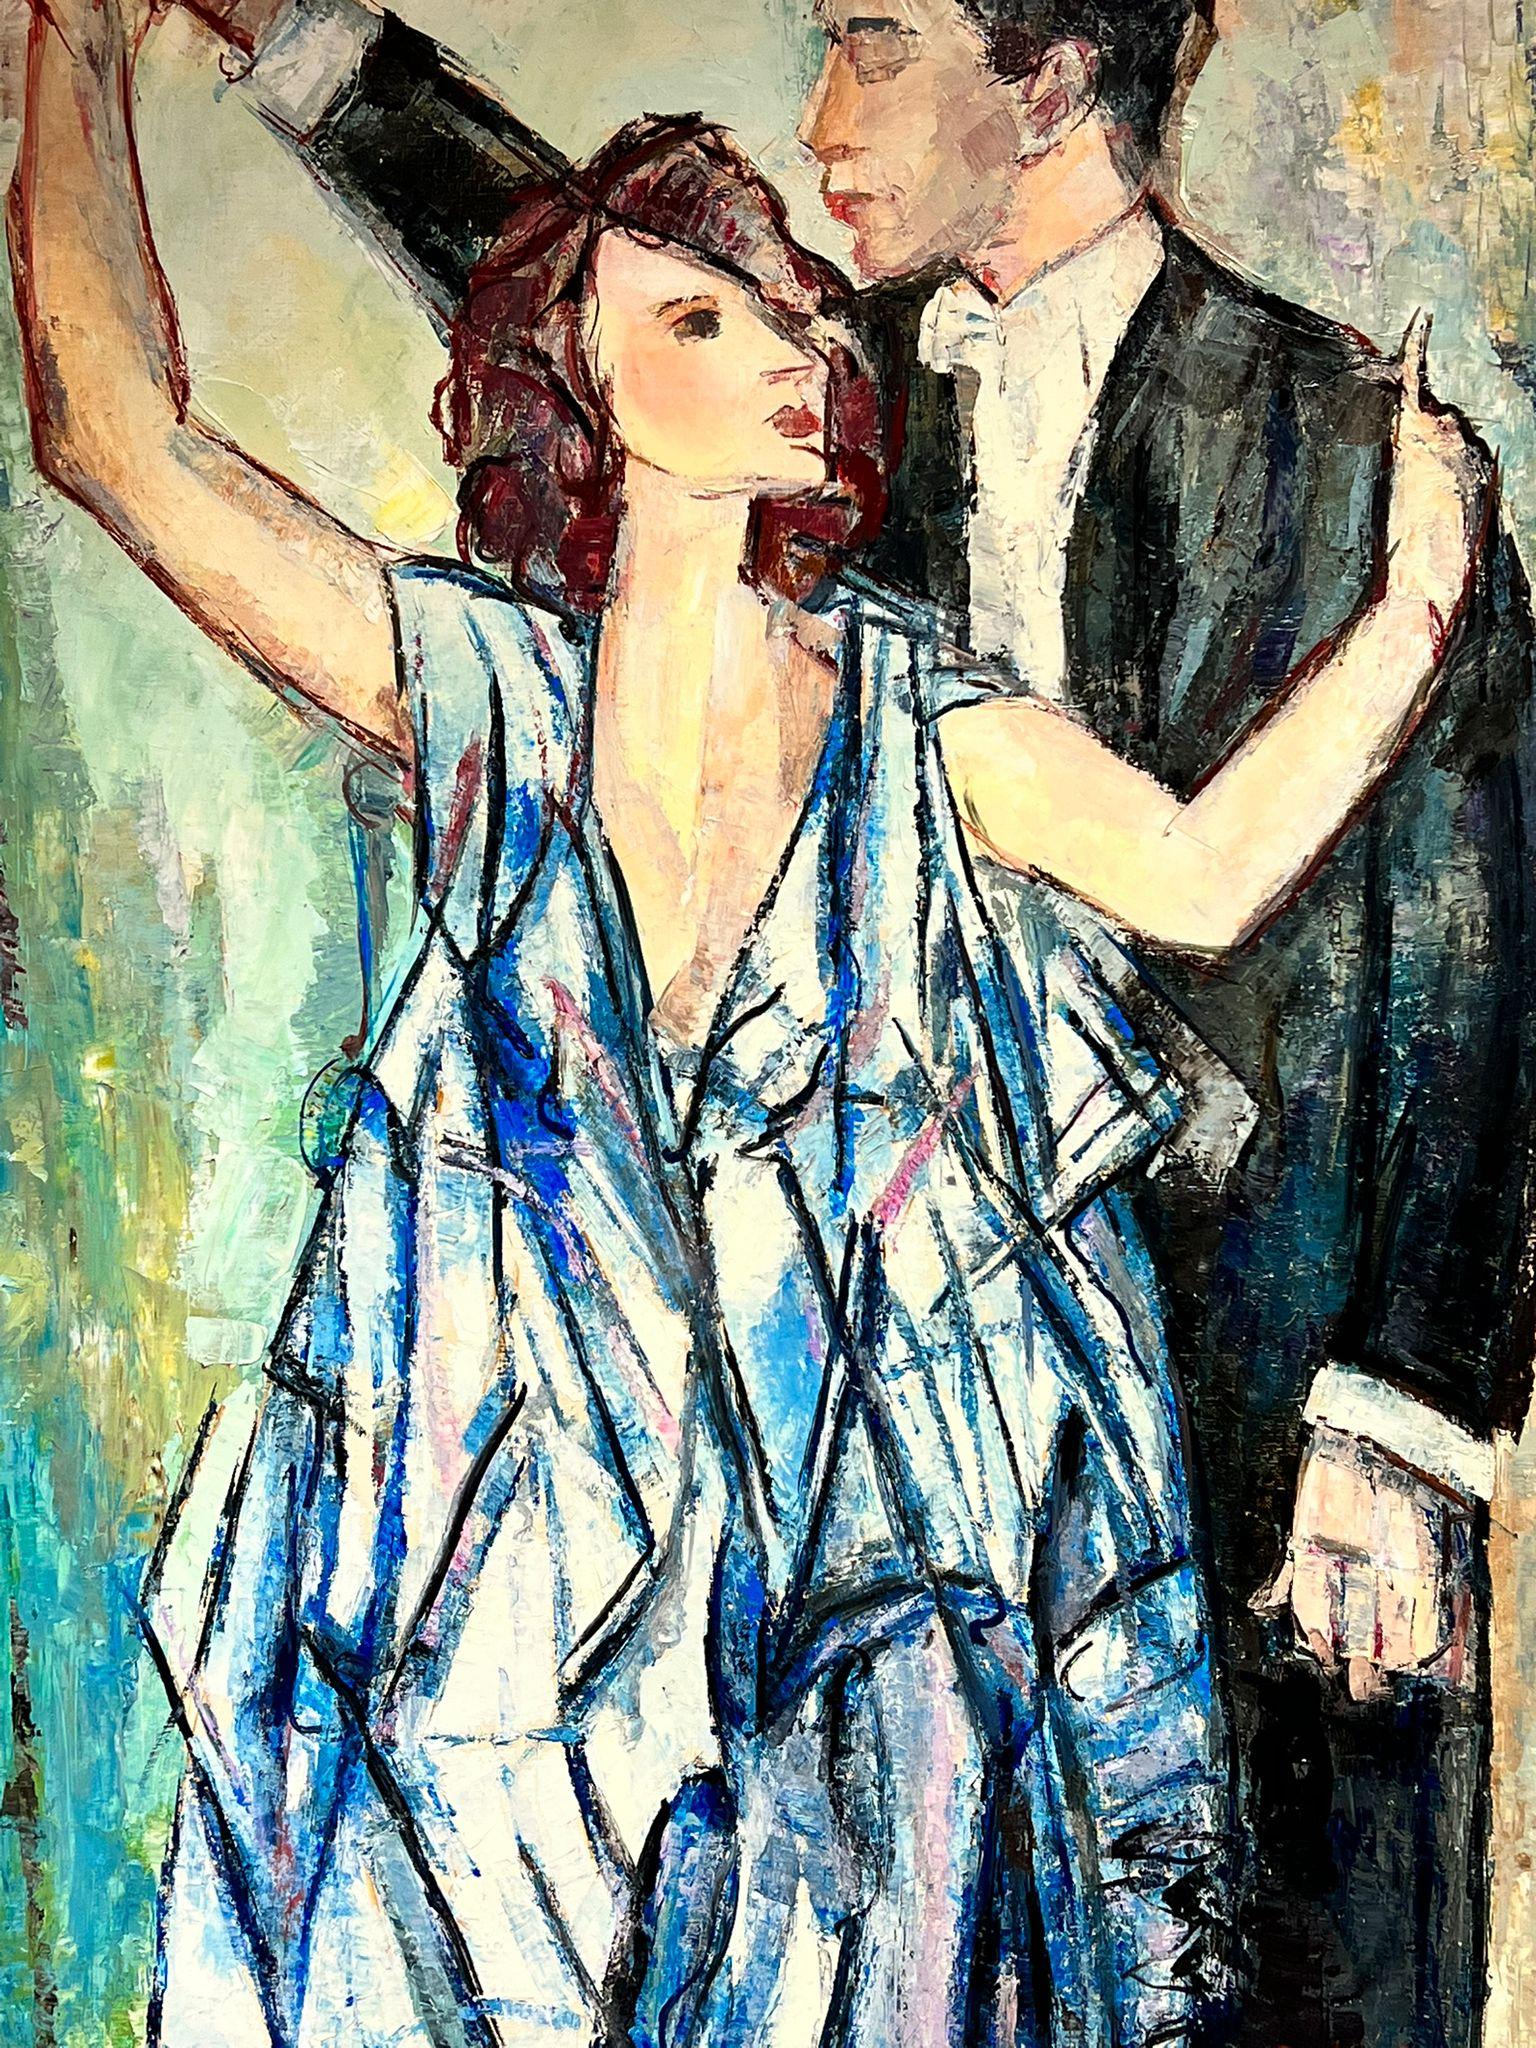 The Dancers
by Maria Tort Xirau (Catalan, 1924-2018)
signed lower corner
dated 1999
oil painting on canvas, framed

canvas: 36 x 55 inches
framed: 41 x 60 inches

Very good condition. 

Provenance: from the artists estate, France

Maria Tort Xirau (